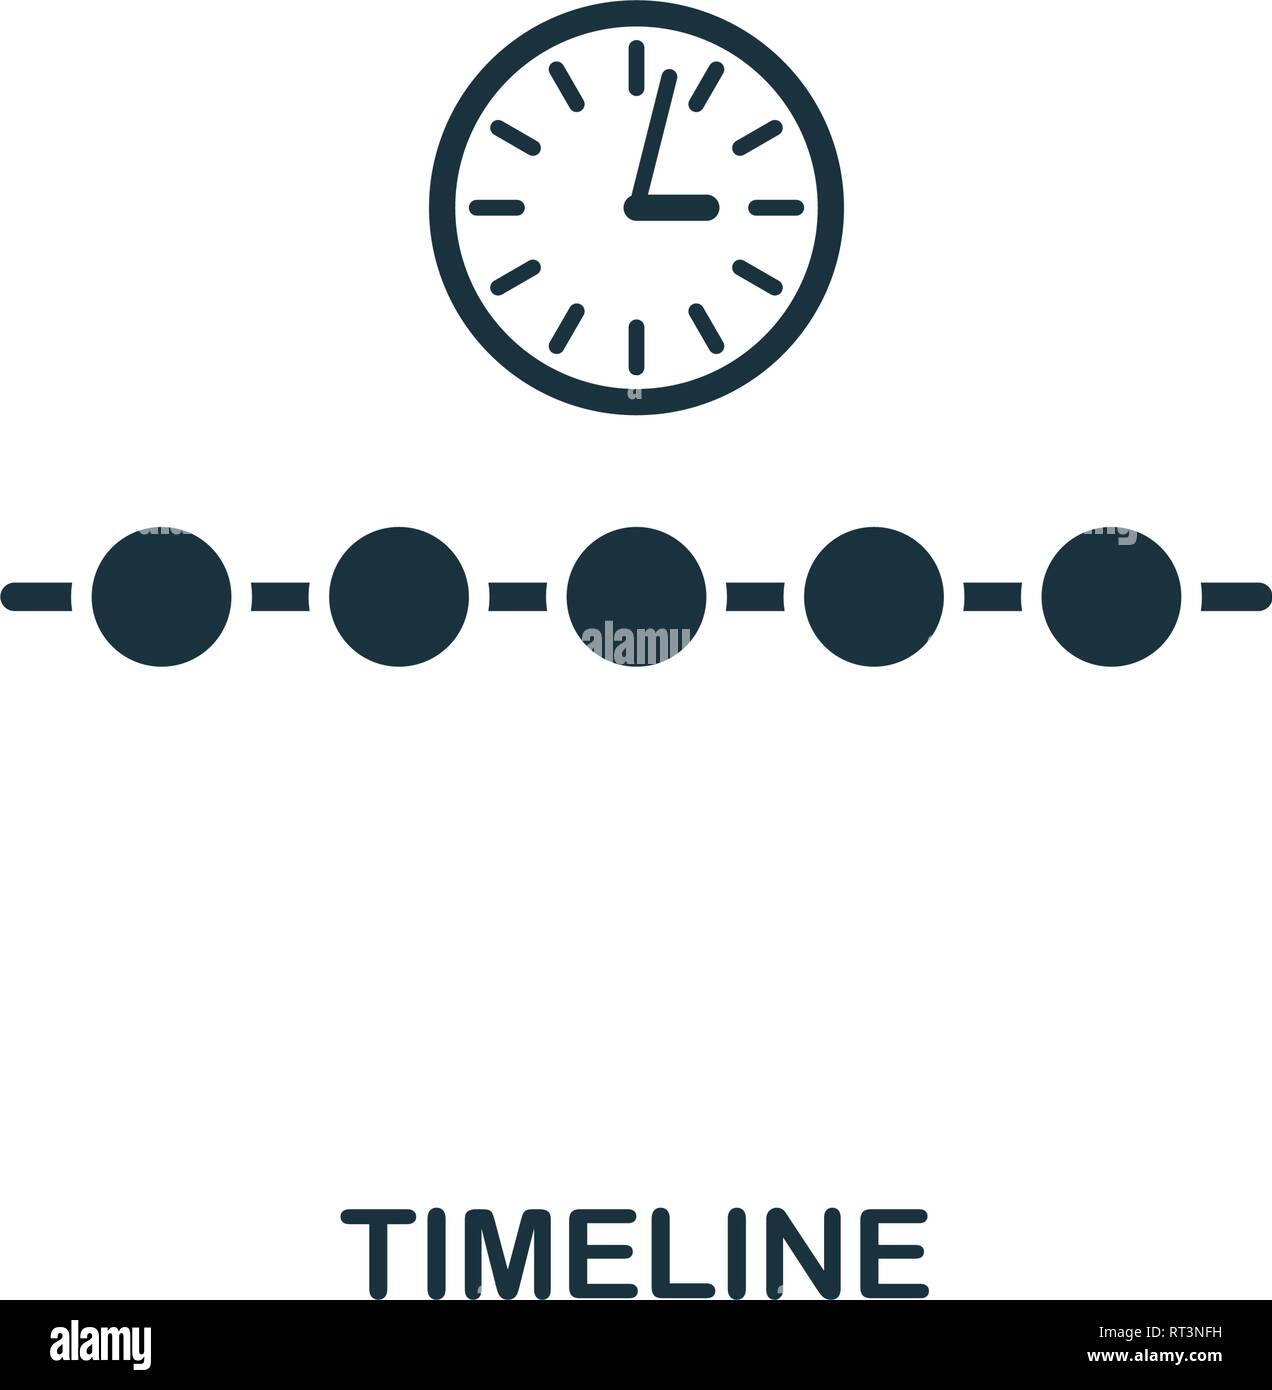 Timeline icon. Creative element design from fintech technology icons collection. Pixel perfect Timeline icon for web design, apps, software, print Stock Vector